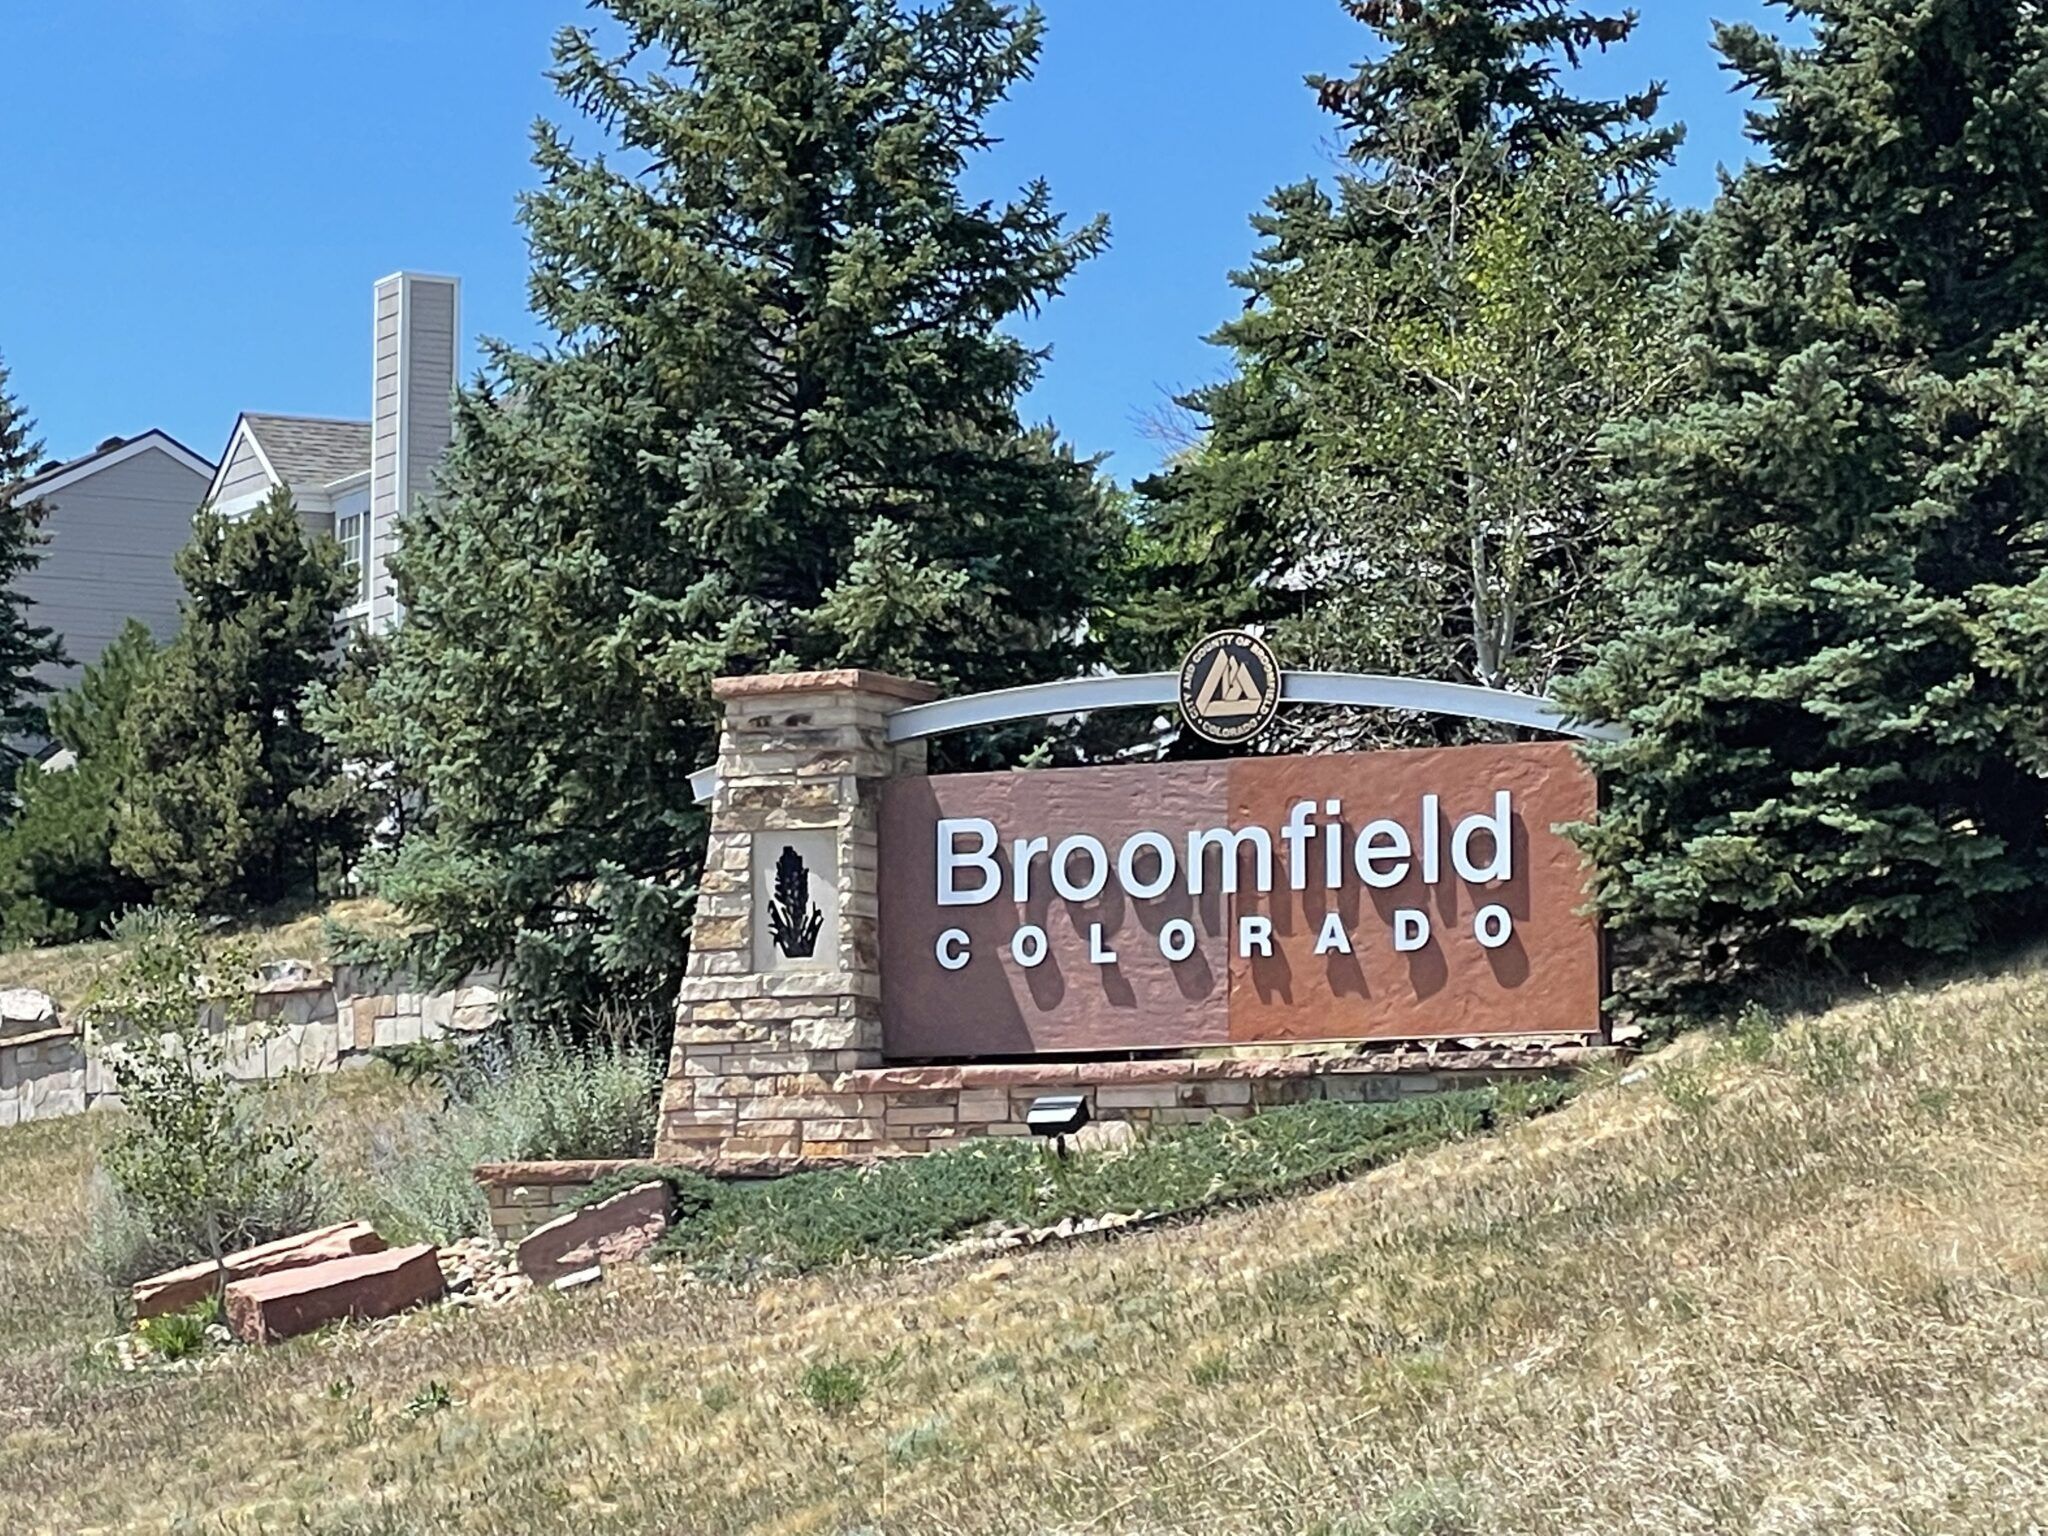 Cybersecurity company could bring 130 jobs to Broomfield